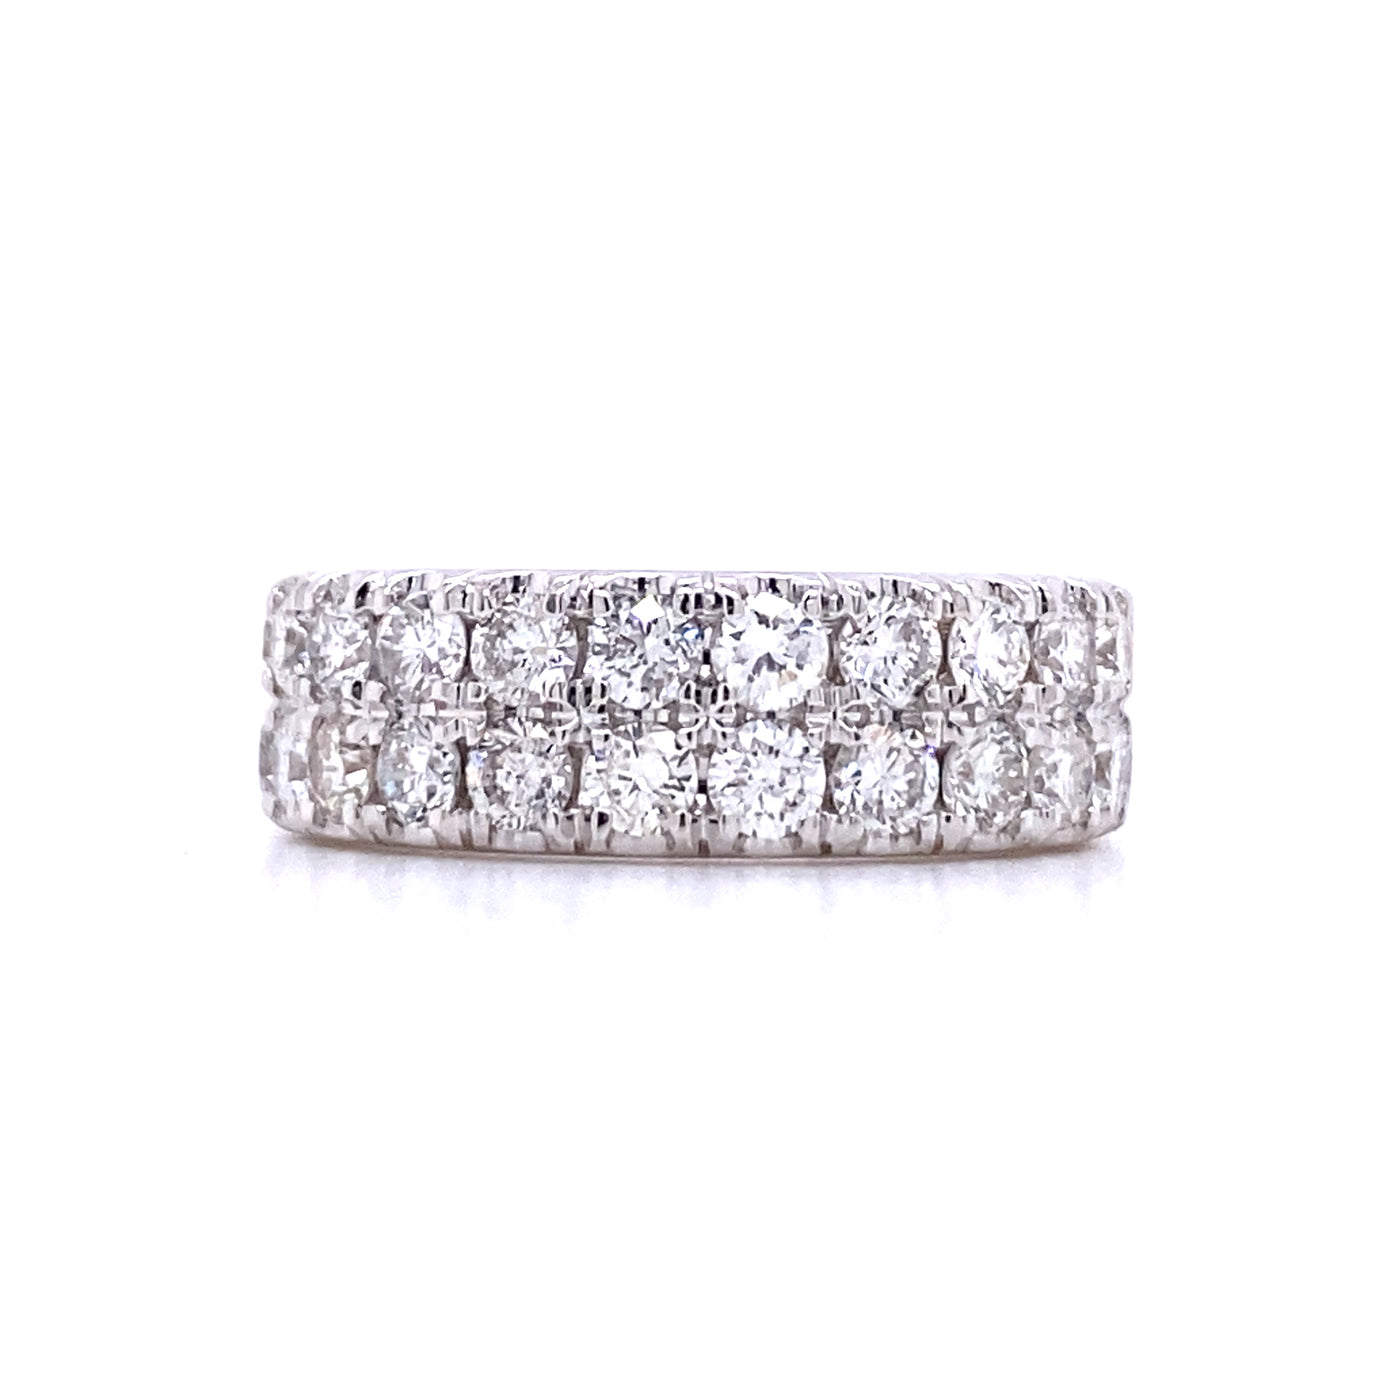 Beeghly & Co. 14 Karat White Gold  1 1/2 Carat Diamond Double Row Band - Women's BCR7-DBWP